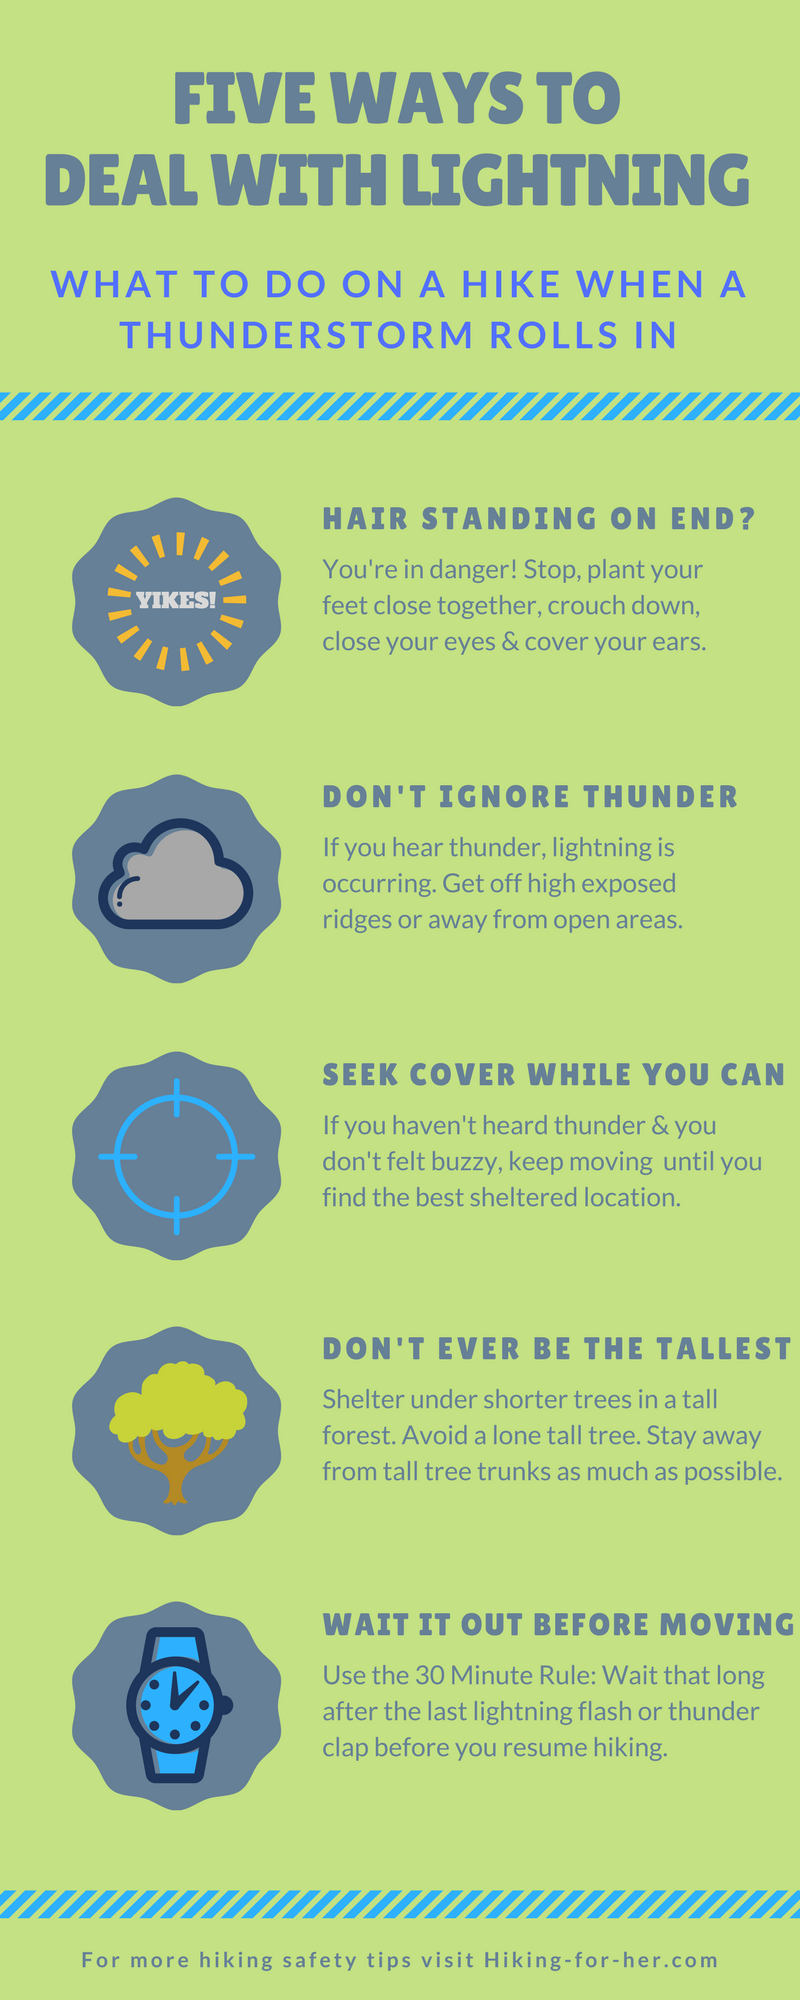 Lightning Safety For Hikers: How To Stay Safe In Thunderstorms